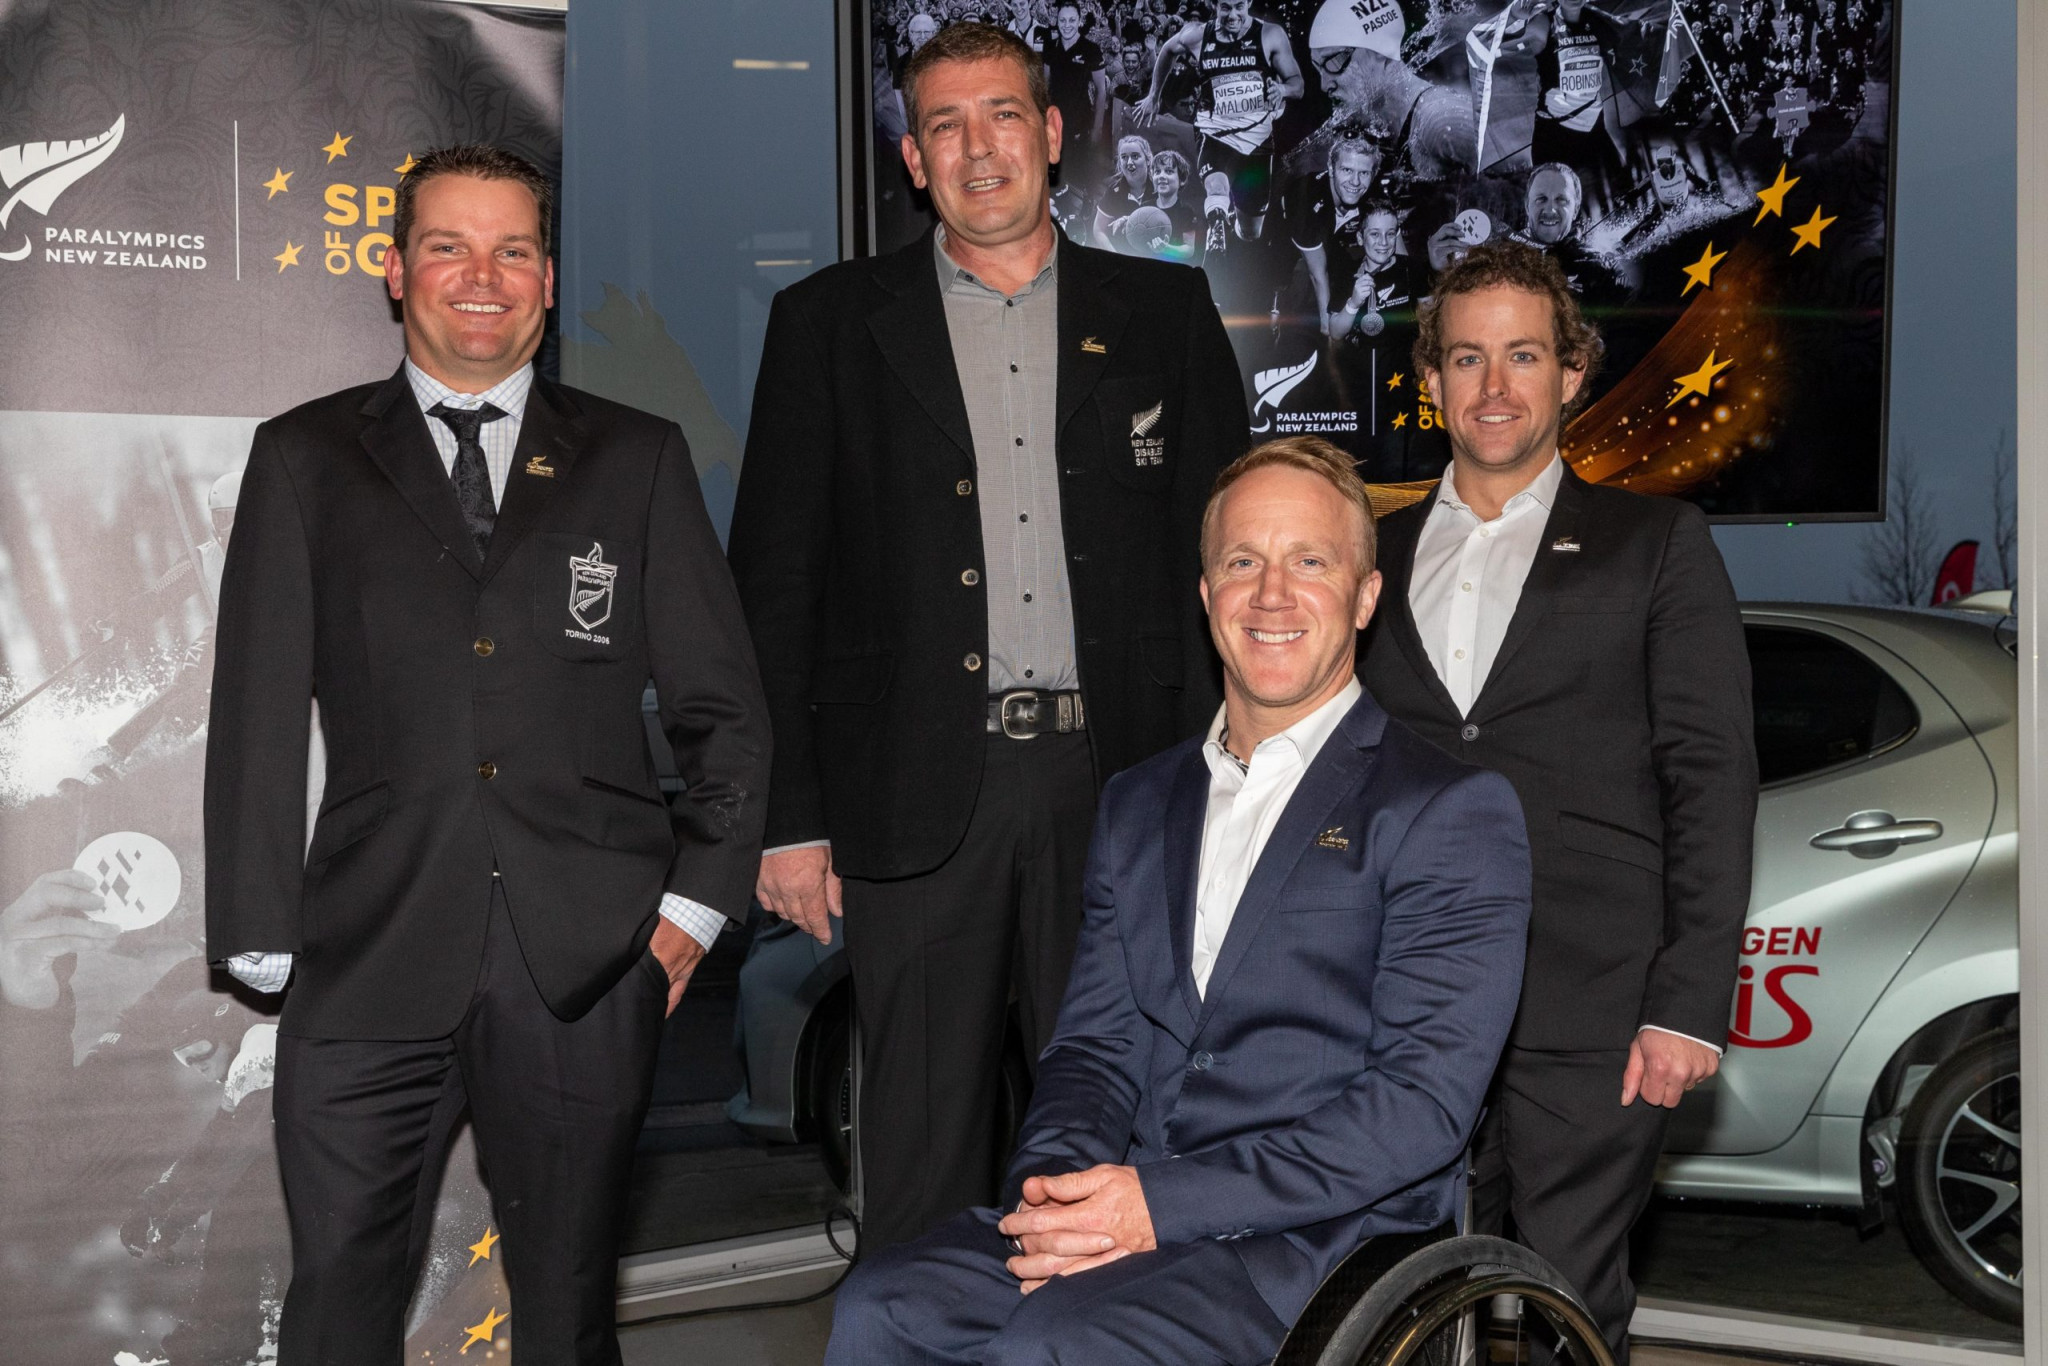 The most recent Paralympians to be honoured by PNZ ©PNZ